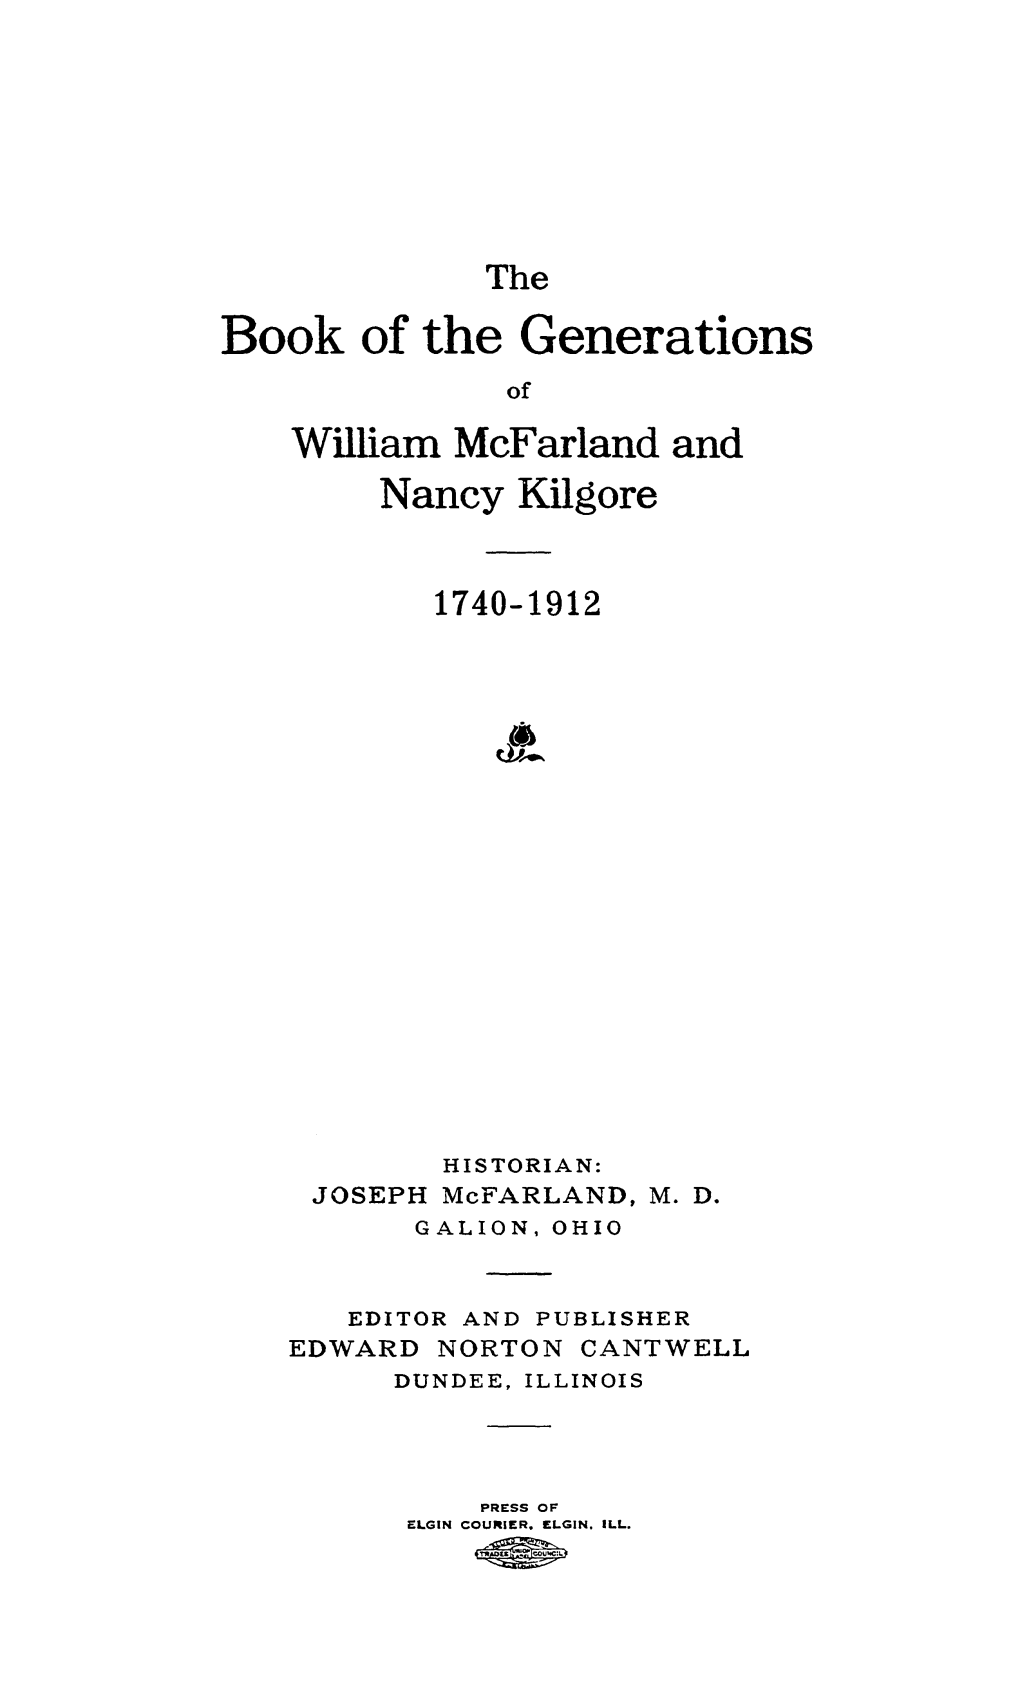 Book of the Generations of William Mcfarland and Nancy Kilgore